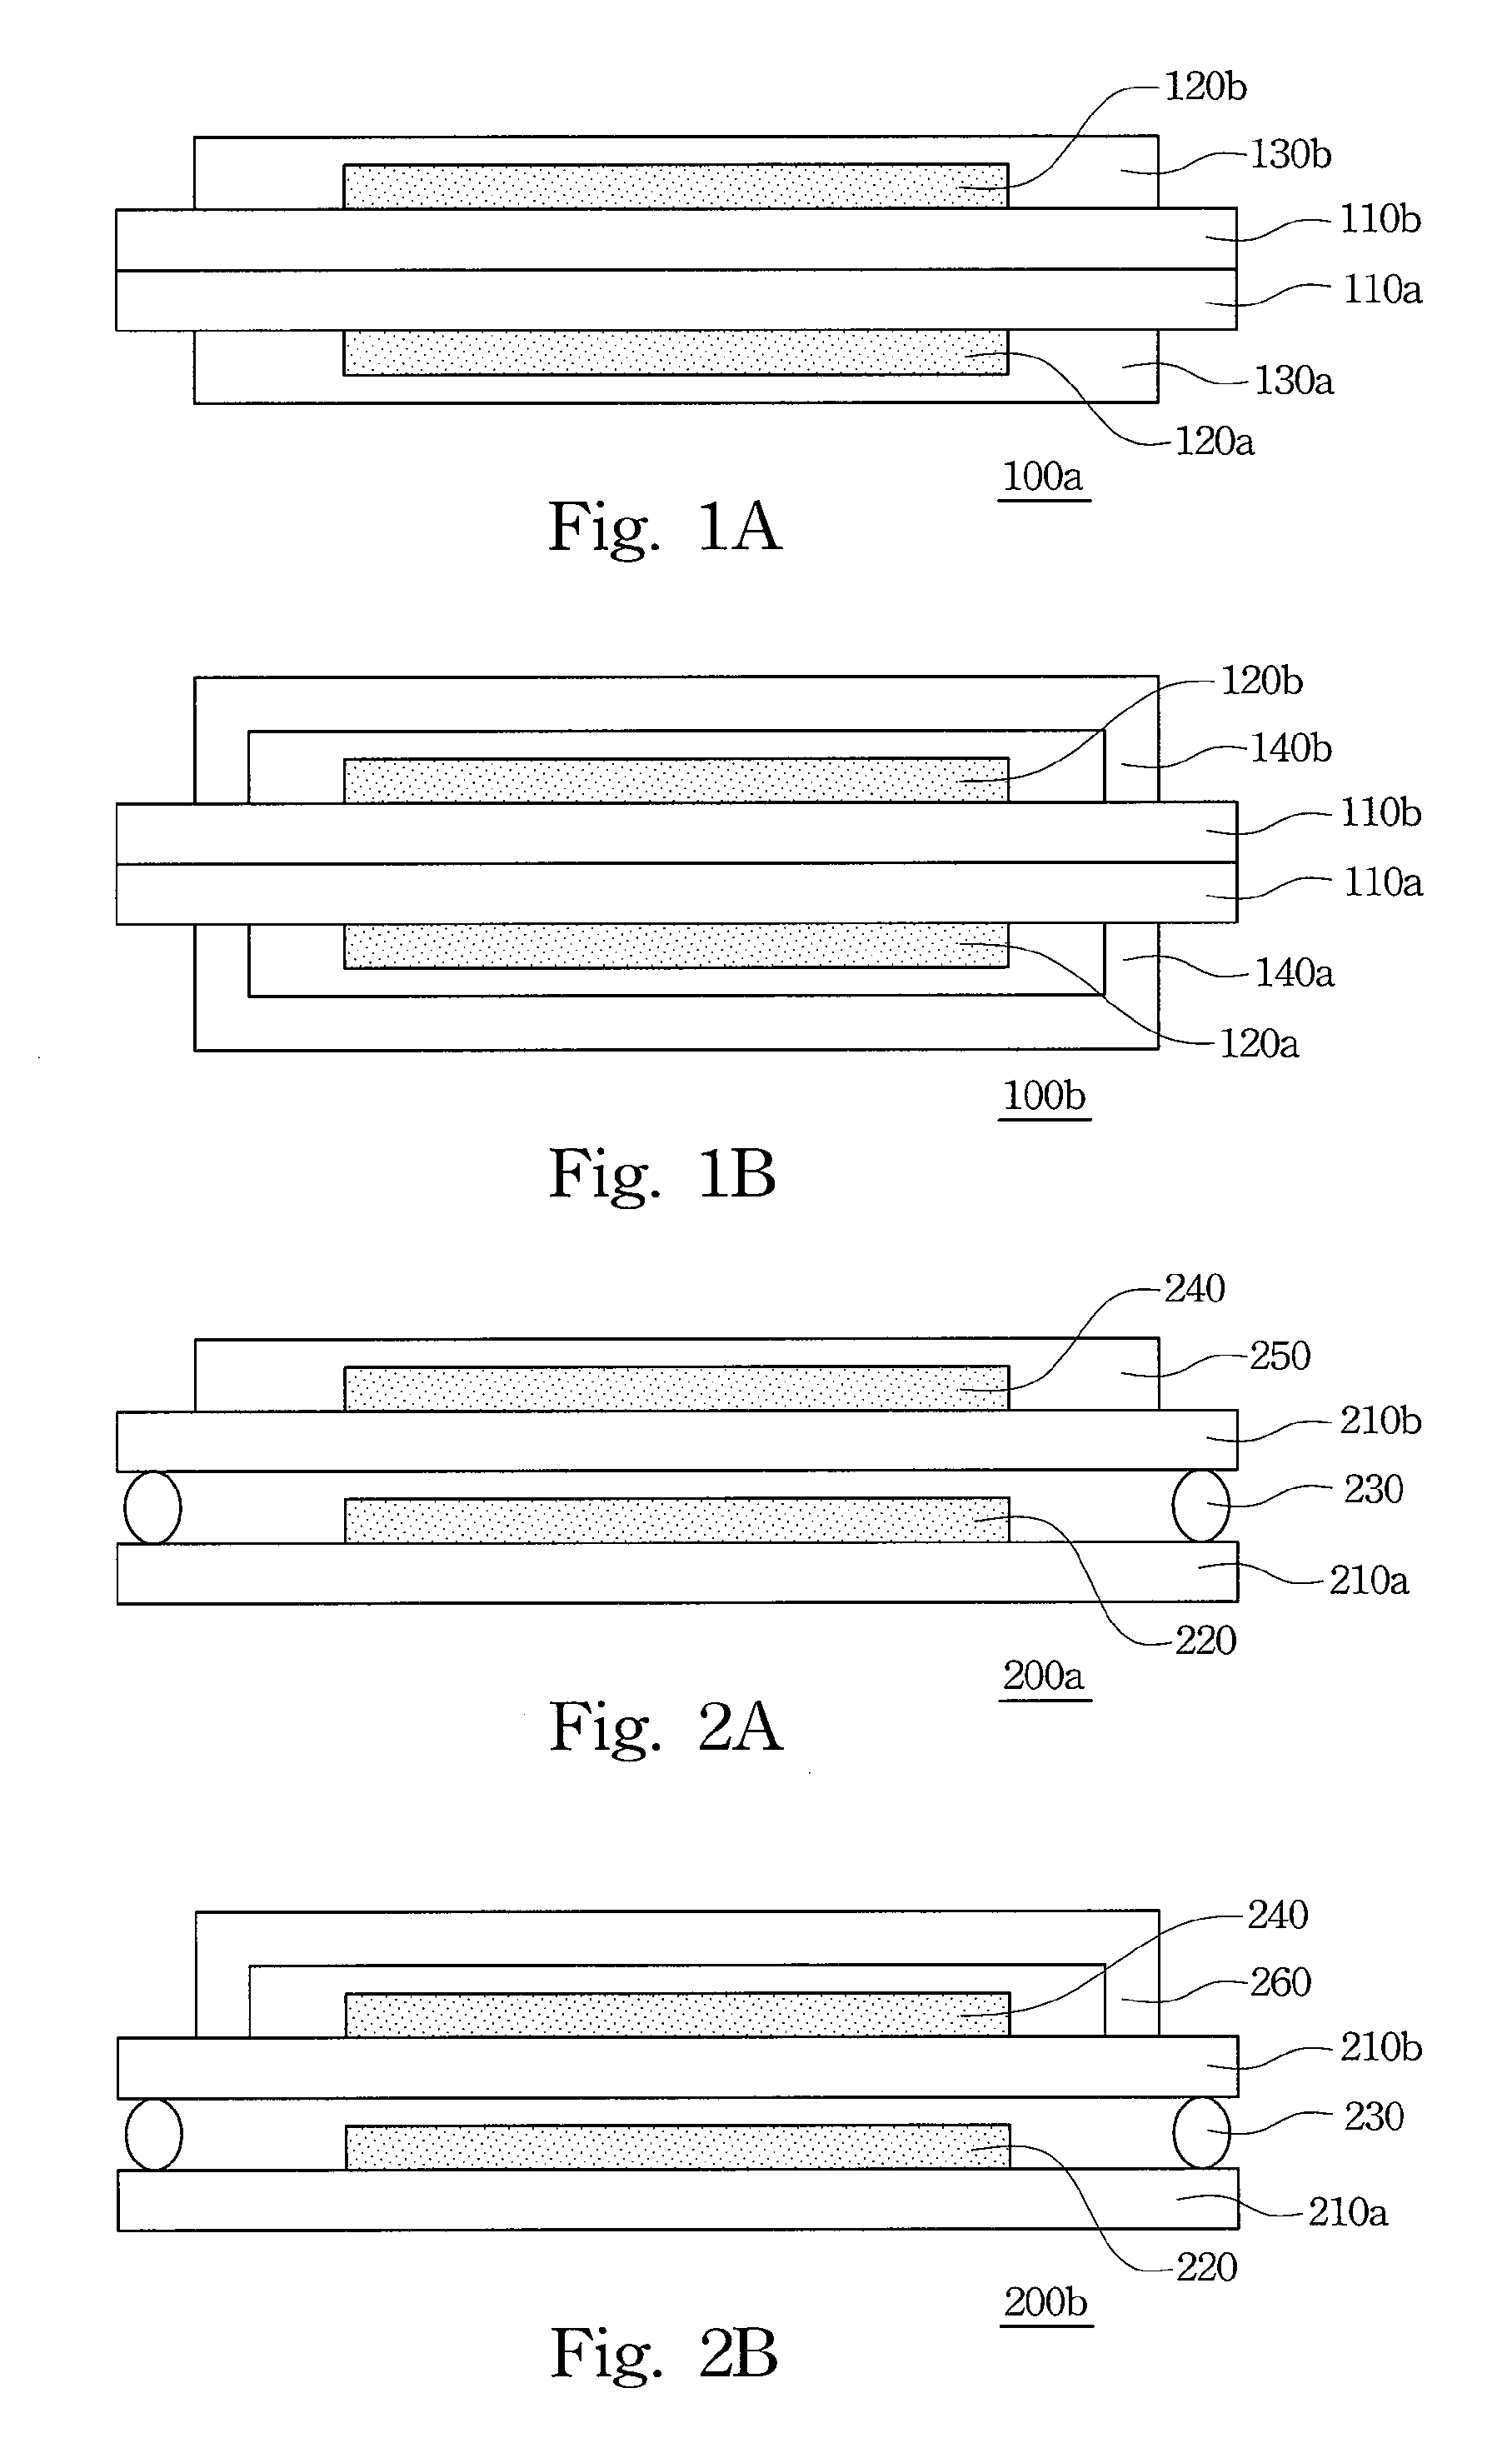 Double-Sided Organic Light-Emitting Diode Display